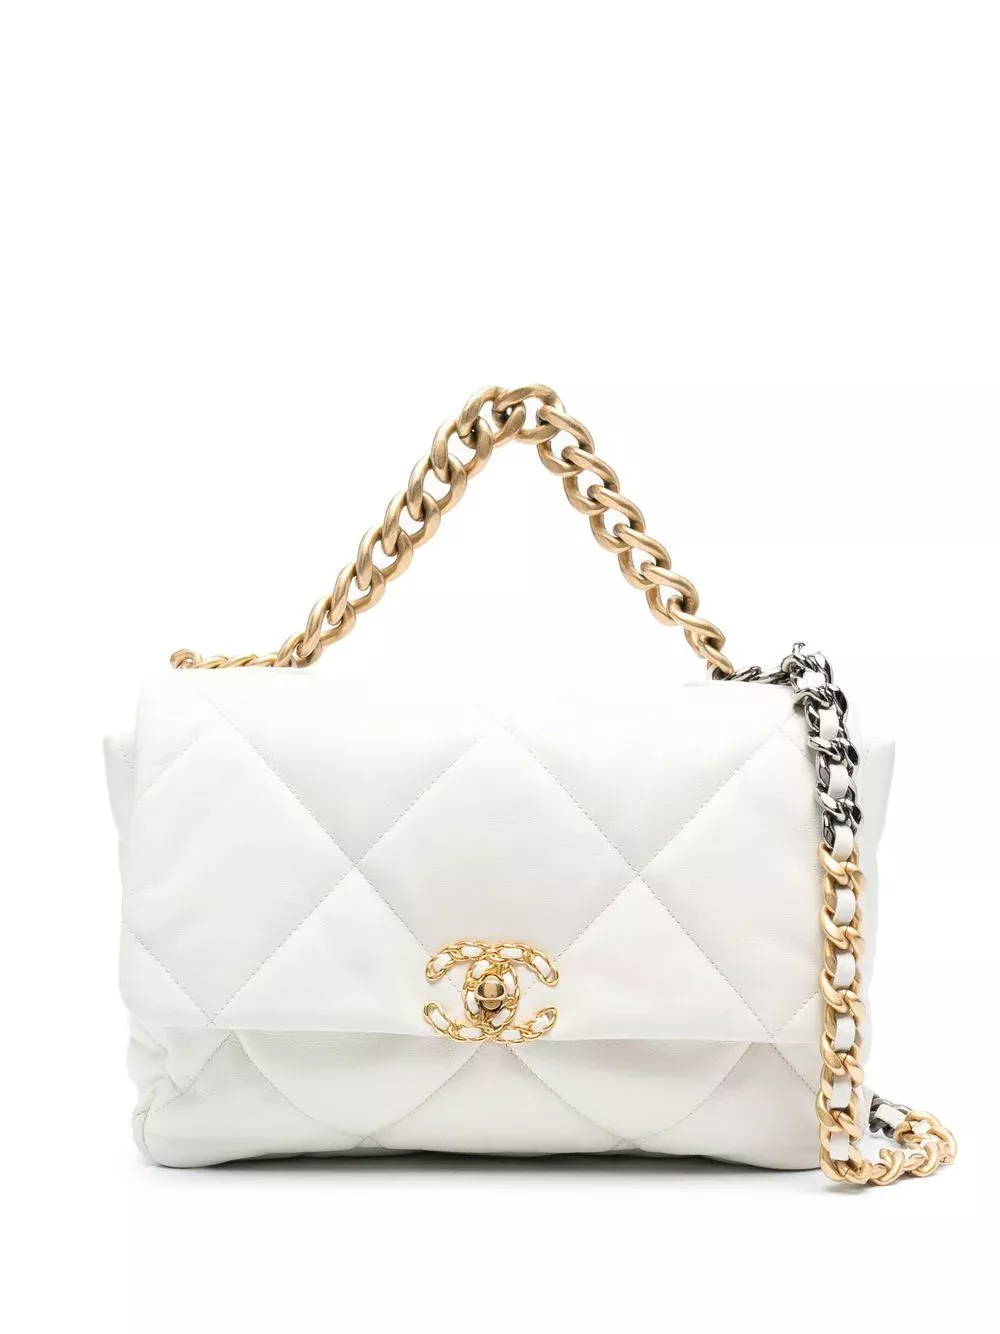 CHANEL Lambskin Quilted Large Chanel 19 Flap Beige 1290463